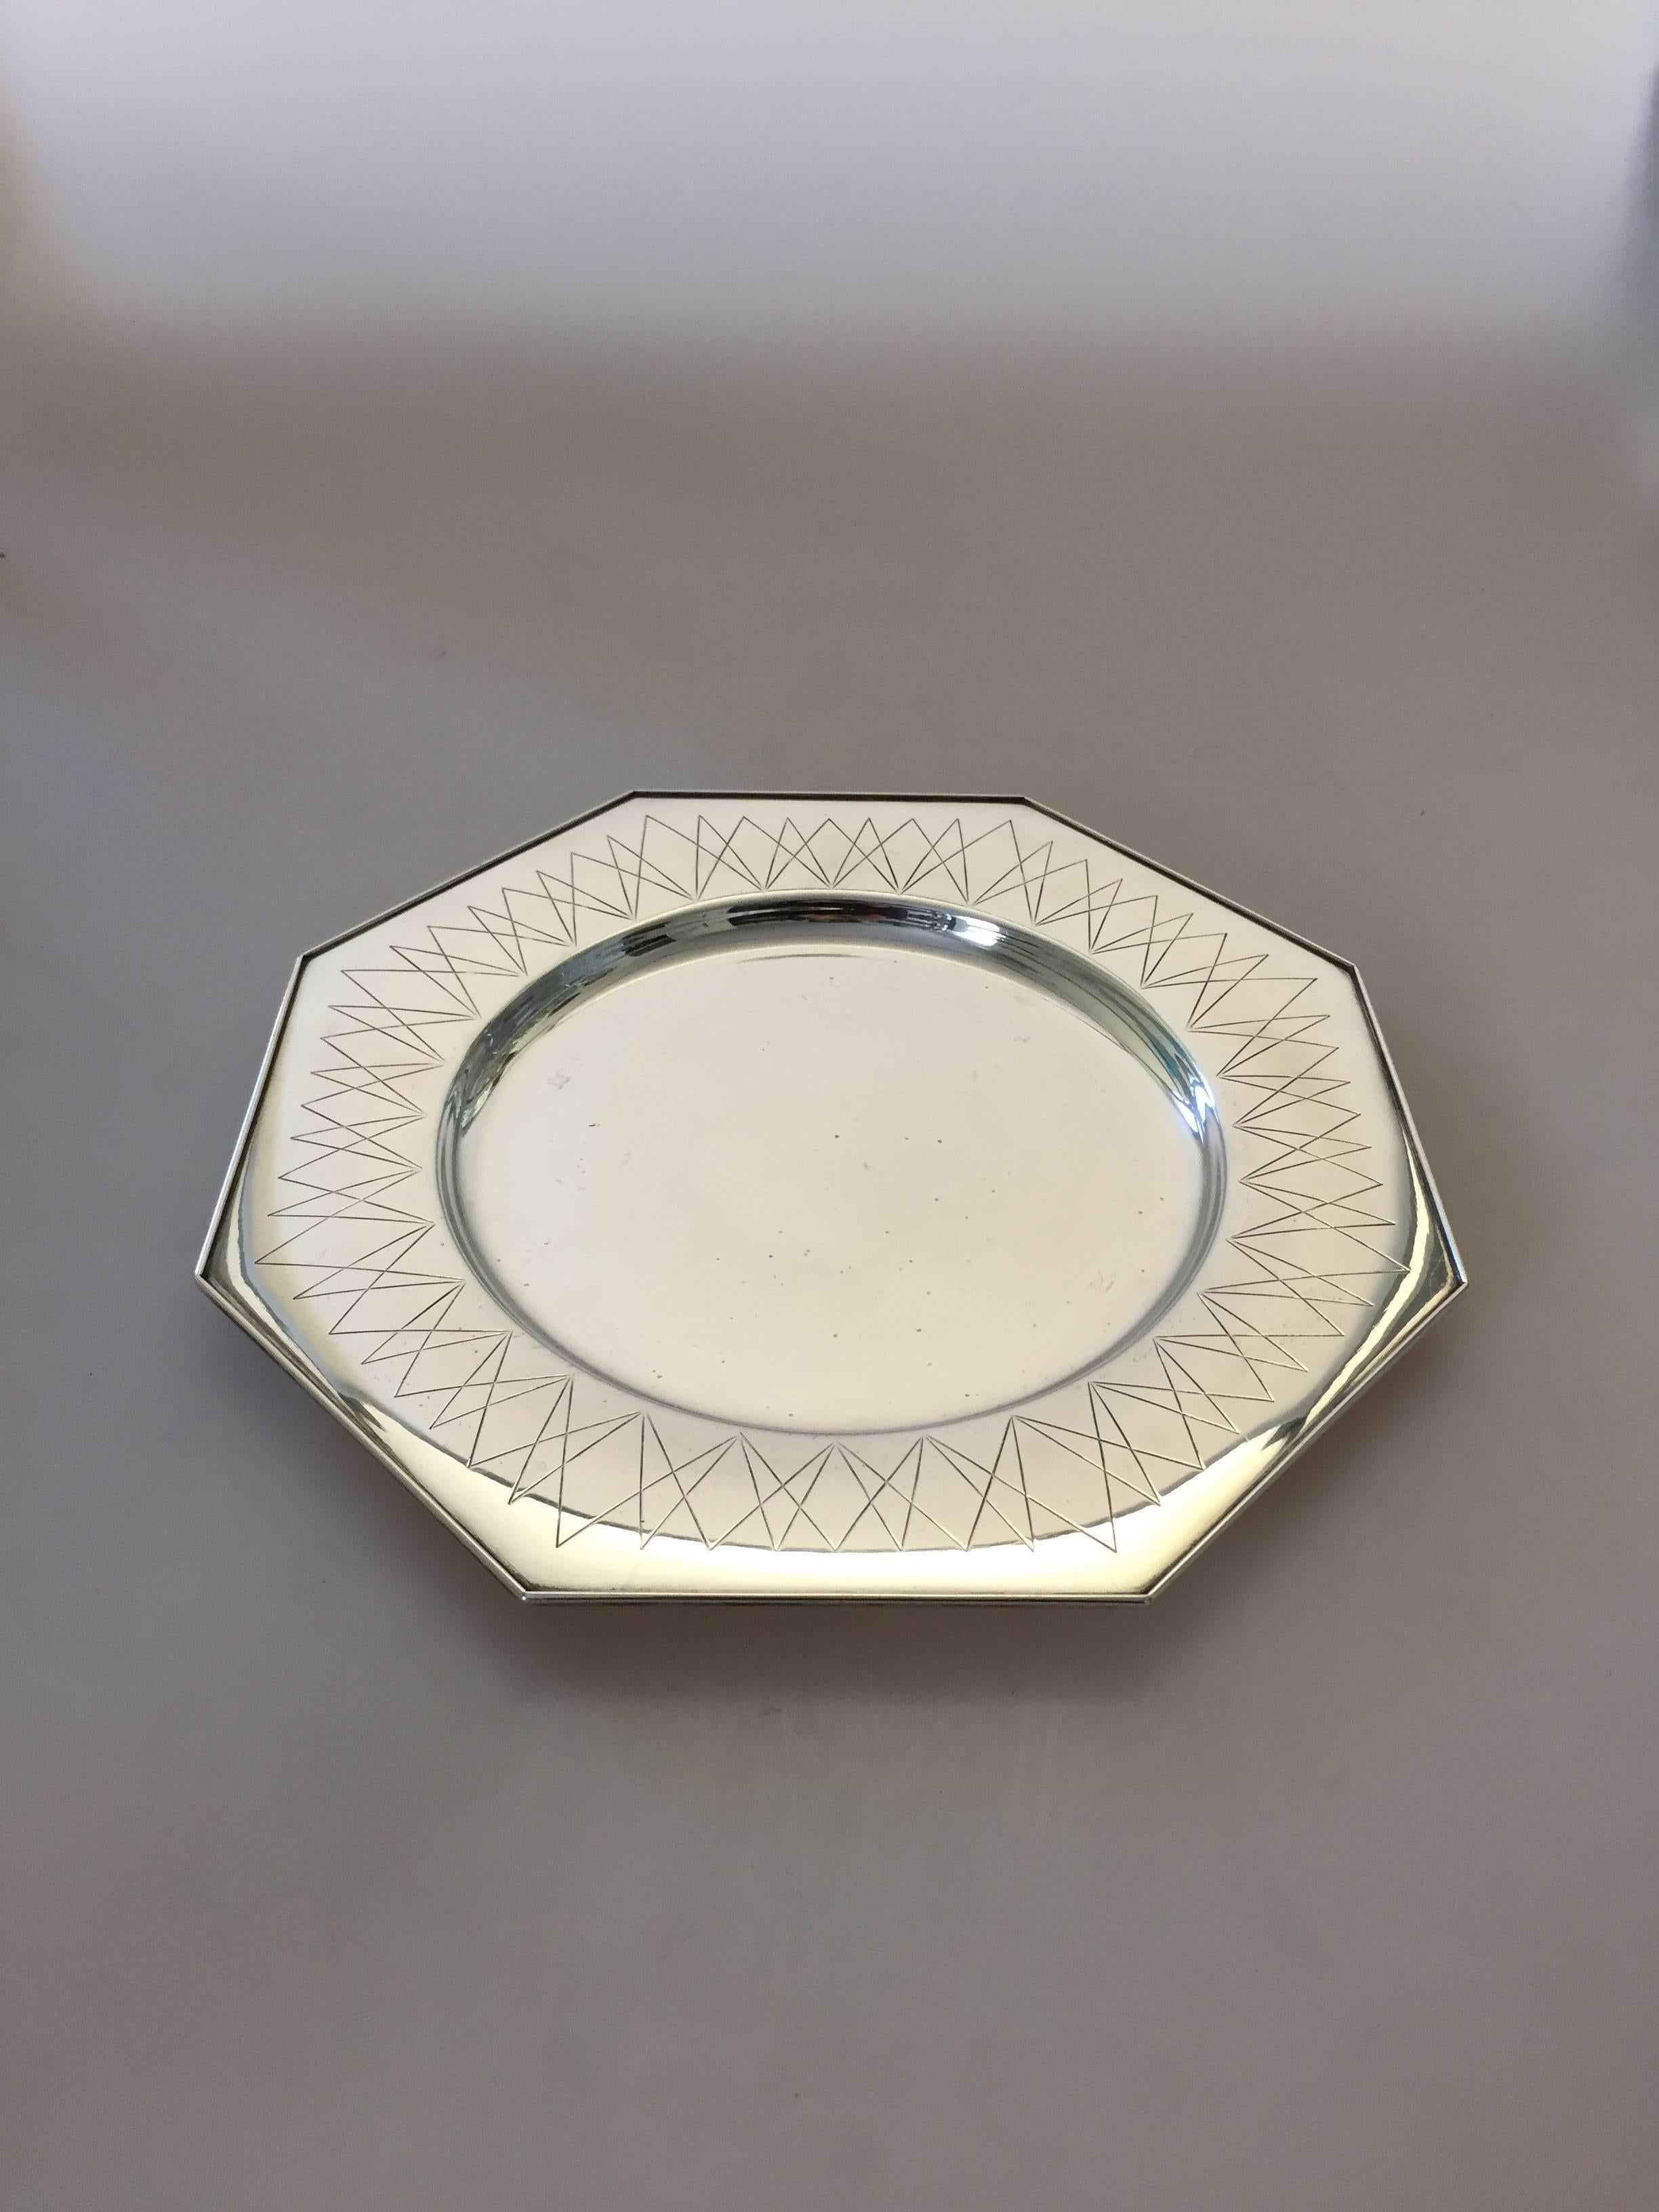 Hans Hansen sterling silver octagon shaped tray #452. Designed in 1952 by Karl Gustav Hansen.

Measures: 30 cm dia. 1.7 cm H.

Hans Hansen (1884-1940) was a Danish silversmithy. He opened his own smithy and shop in Kolding, Denmark in 1906.